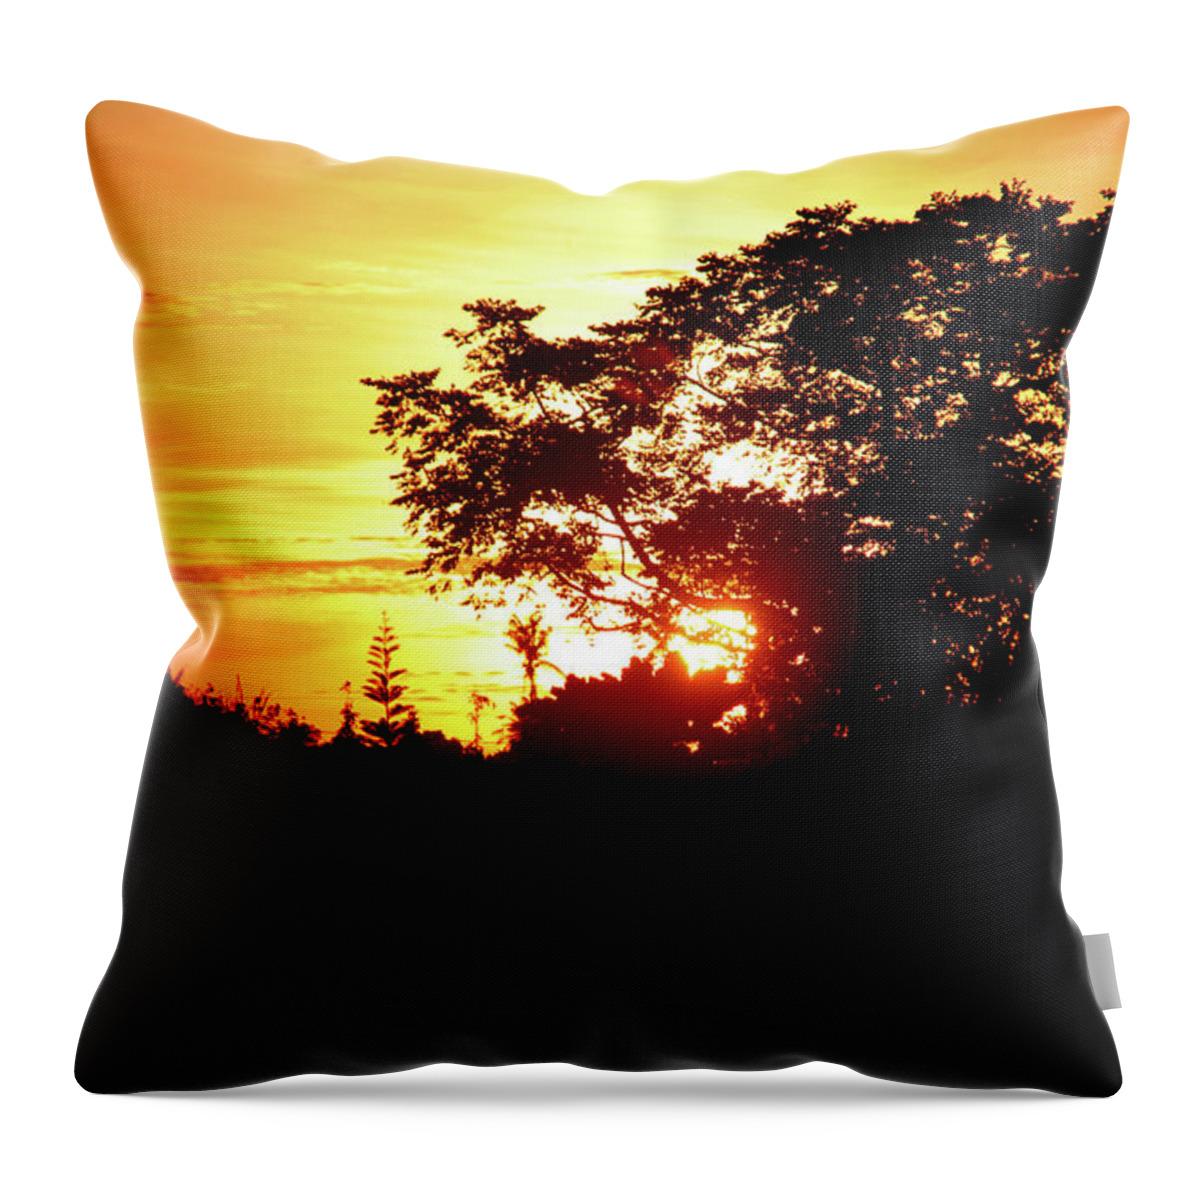 Philippines Throw Pillow featuring the photograph The Day Bids Farewell by Jez C Self